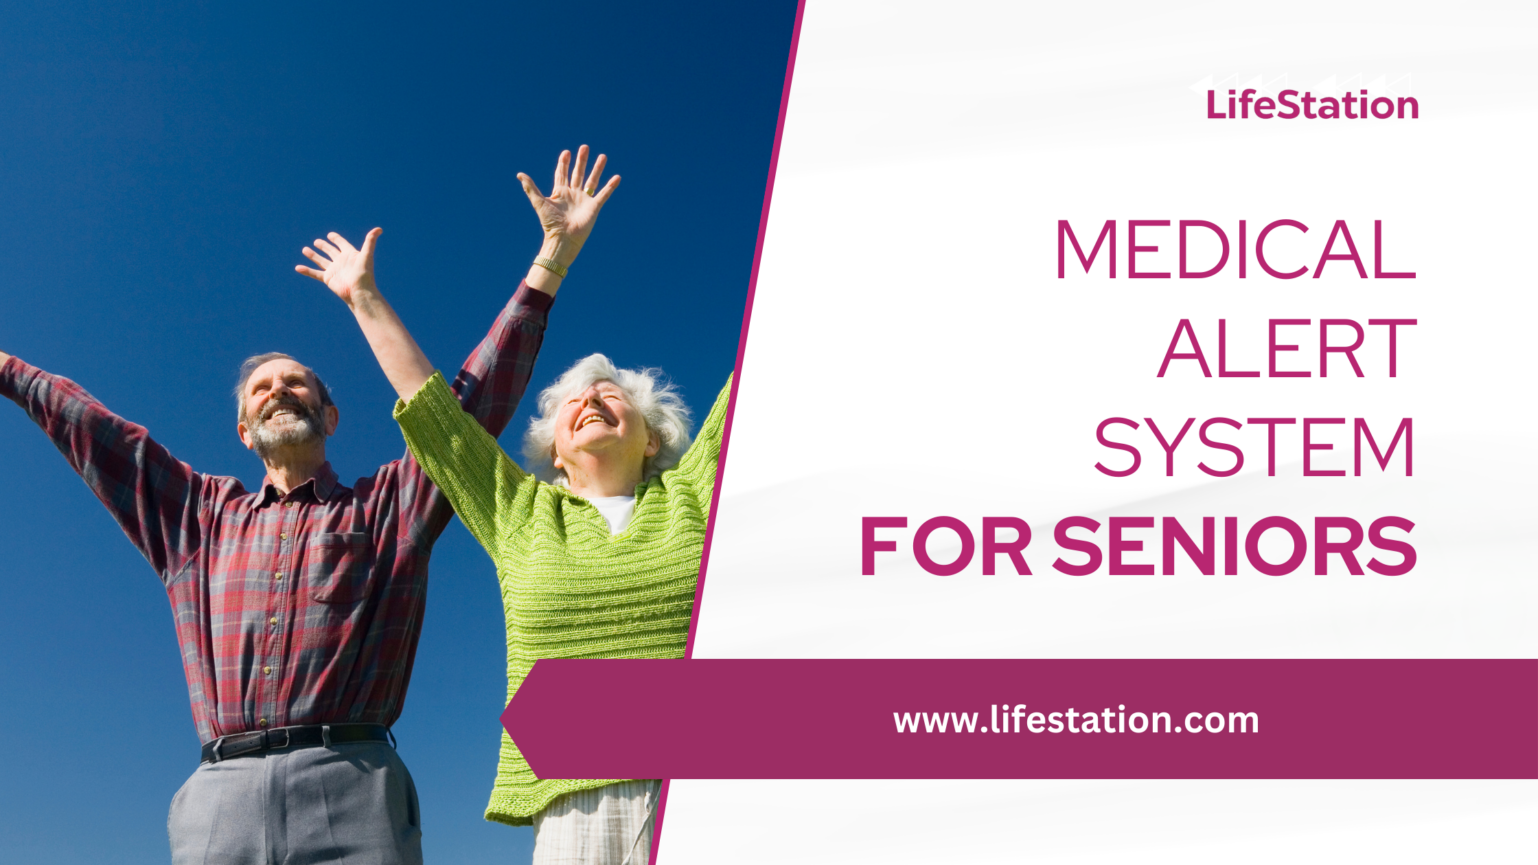 Life Alert's Medical Alert System for Seniors. Two happy elderly people with arms in the sky. They are happy because they have freedom with LifeStation